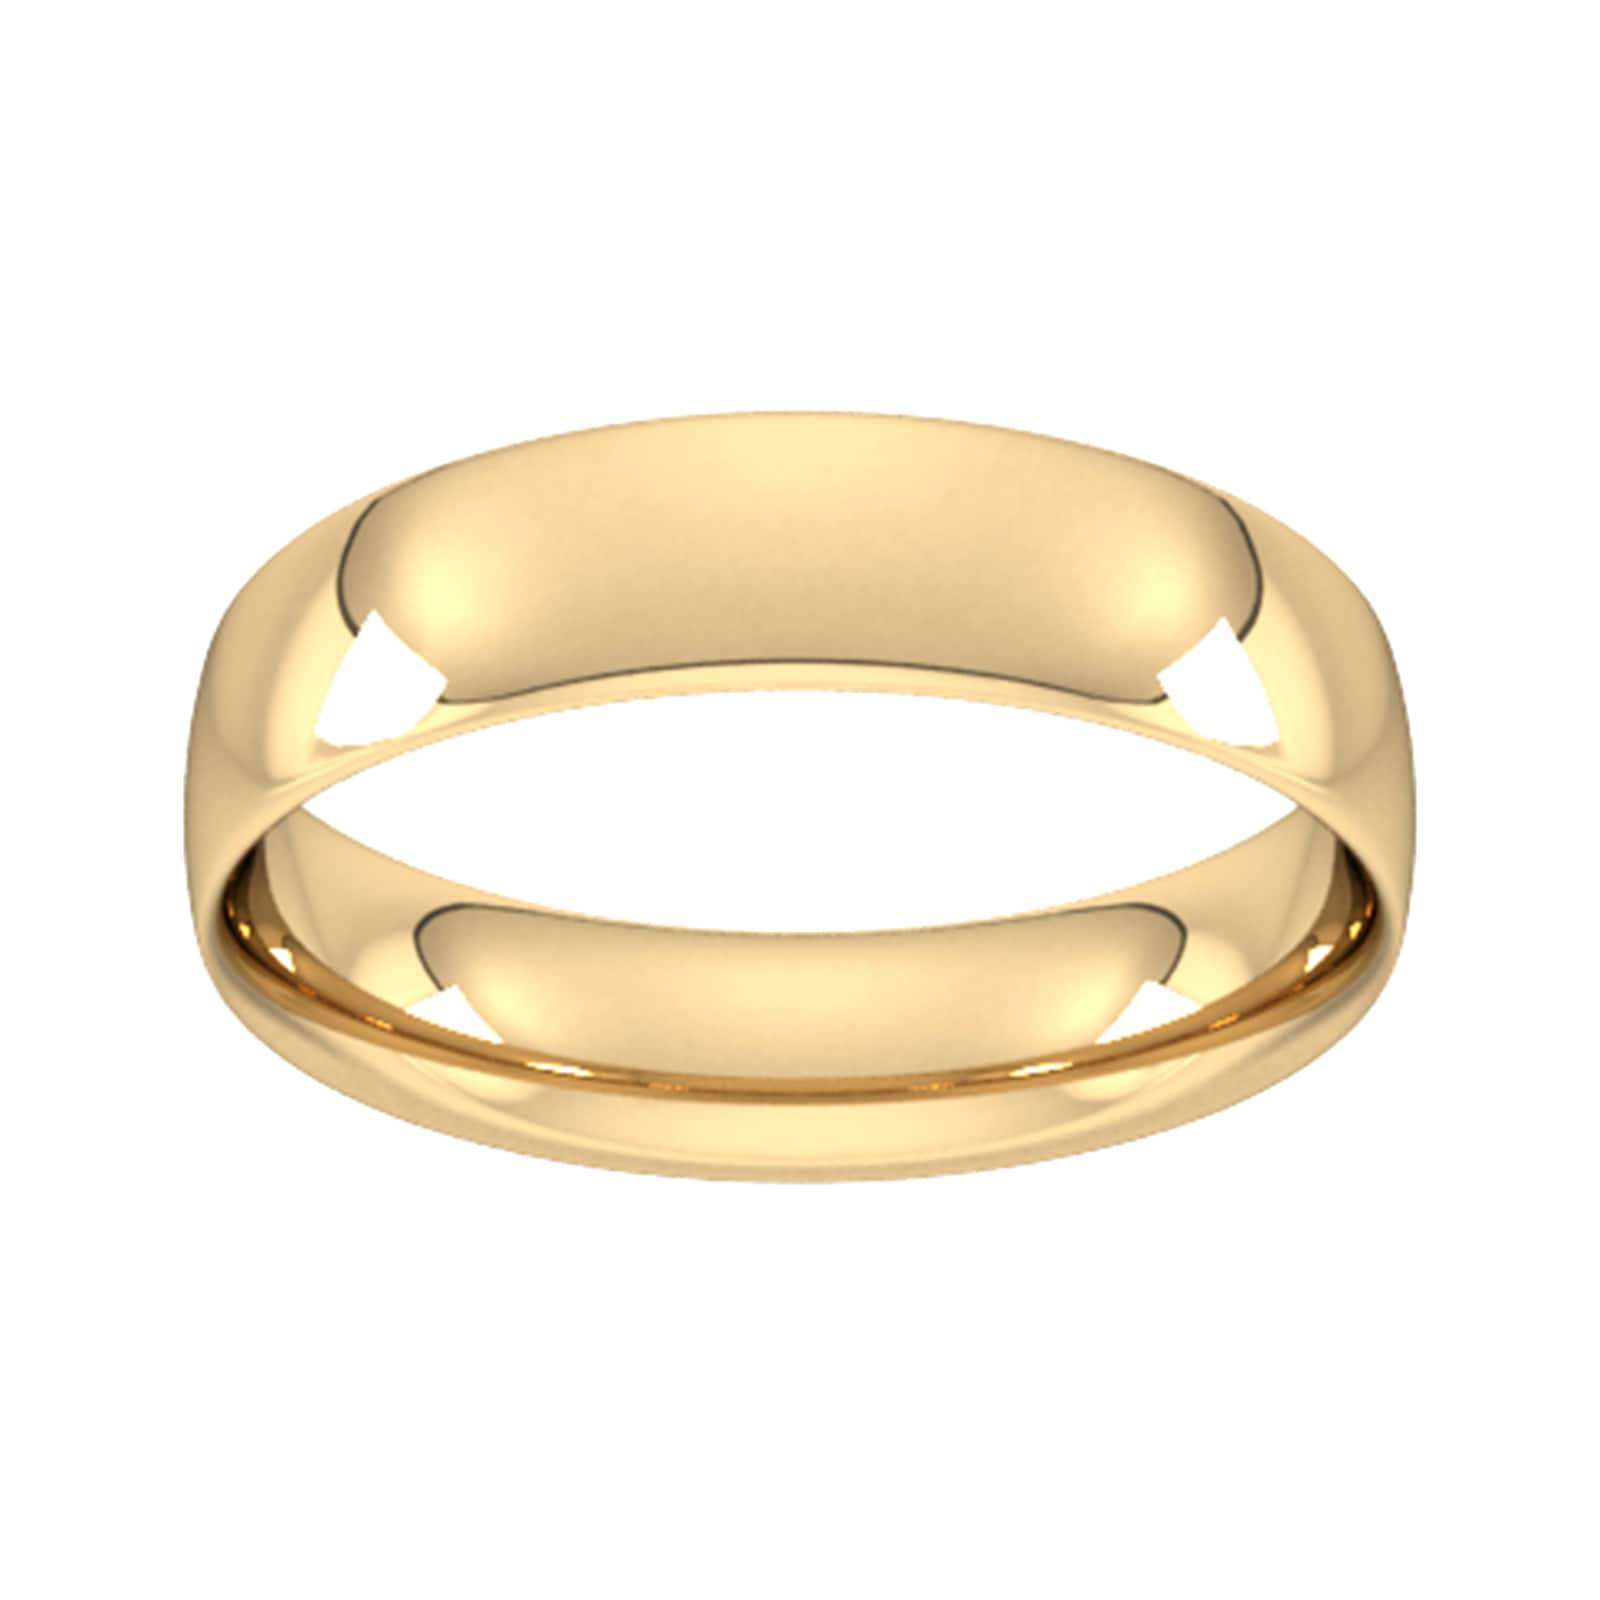 5mm Traditional Court Standard Wedding Ring In 18 Carat Yellow Gold - Ring Size Q